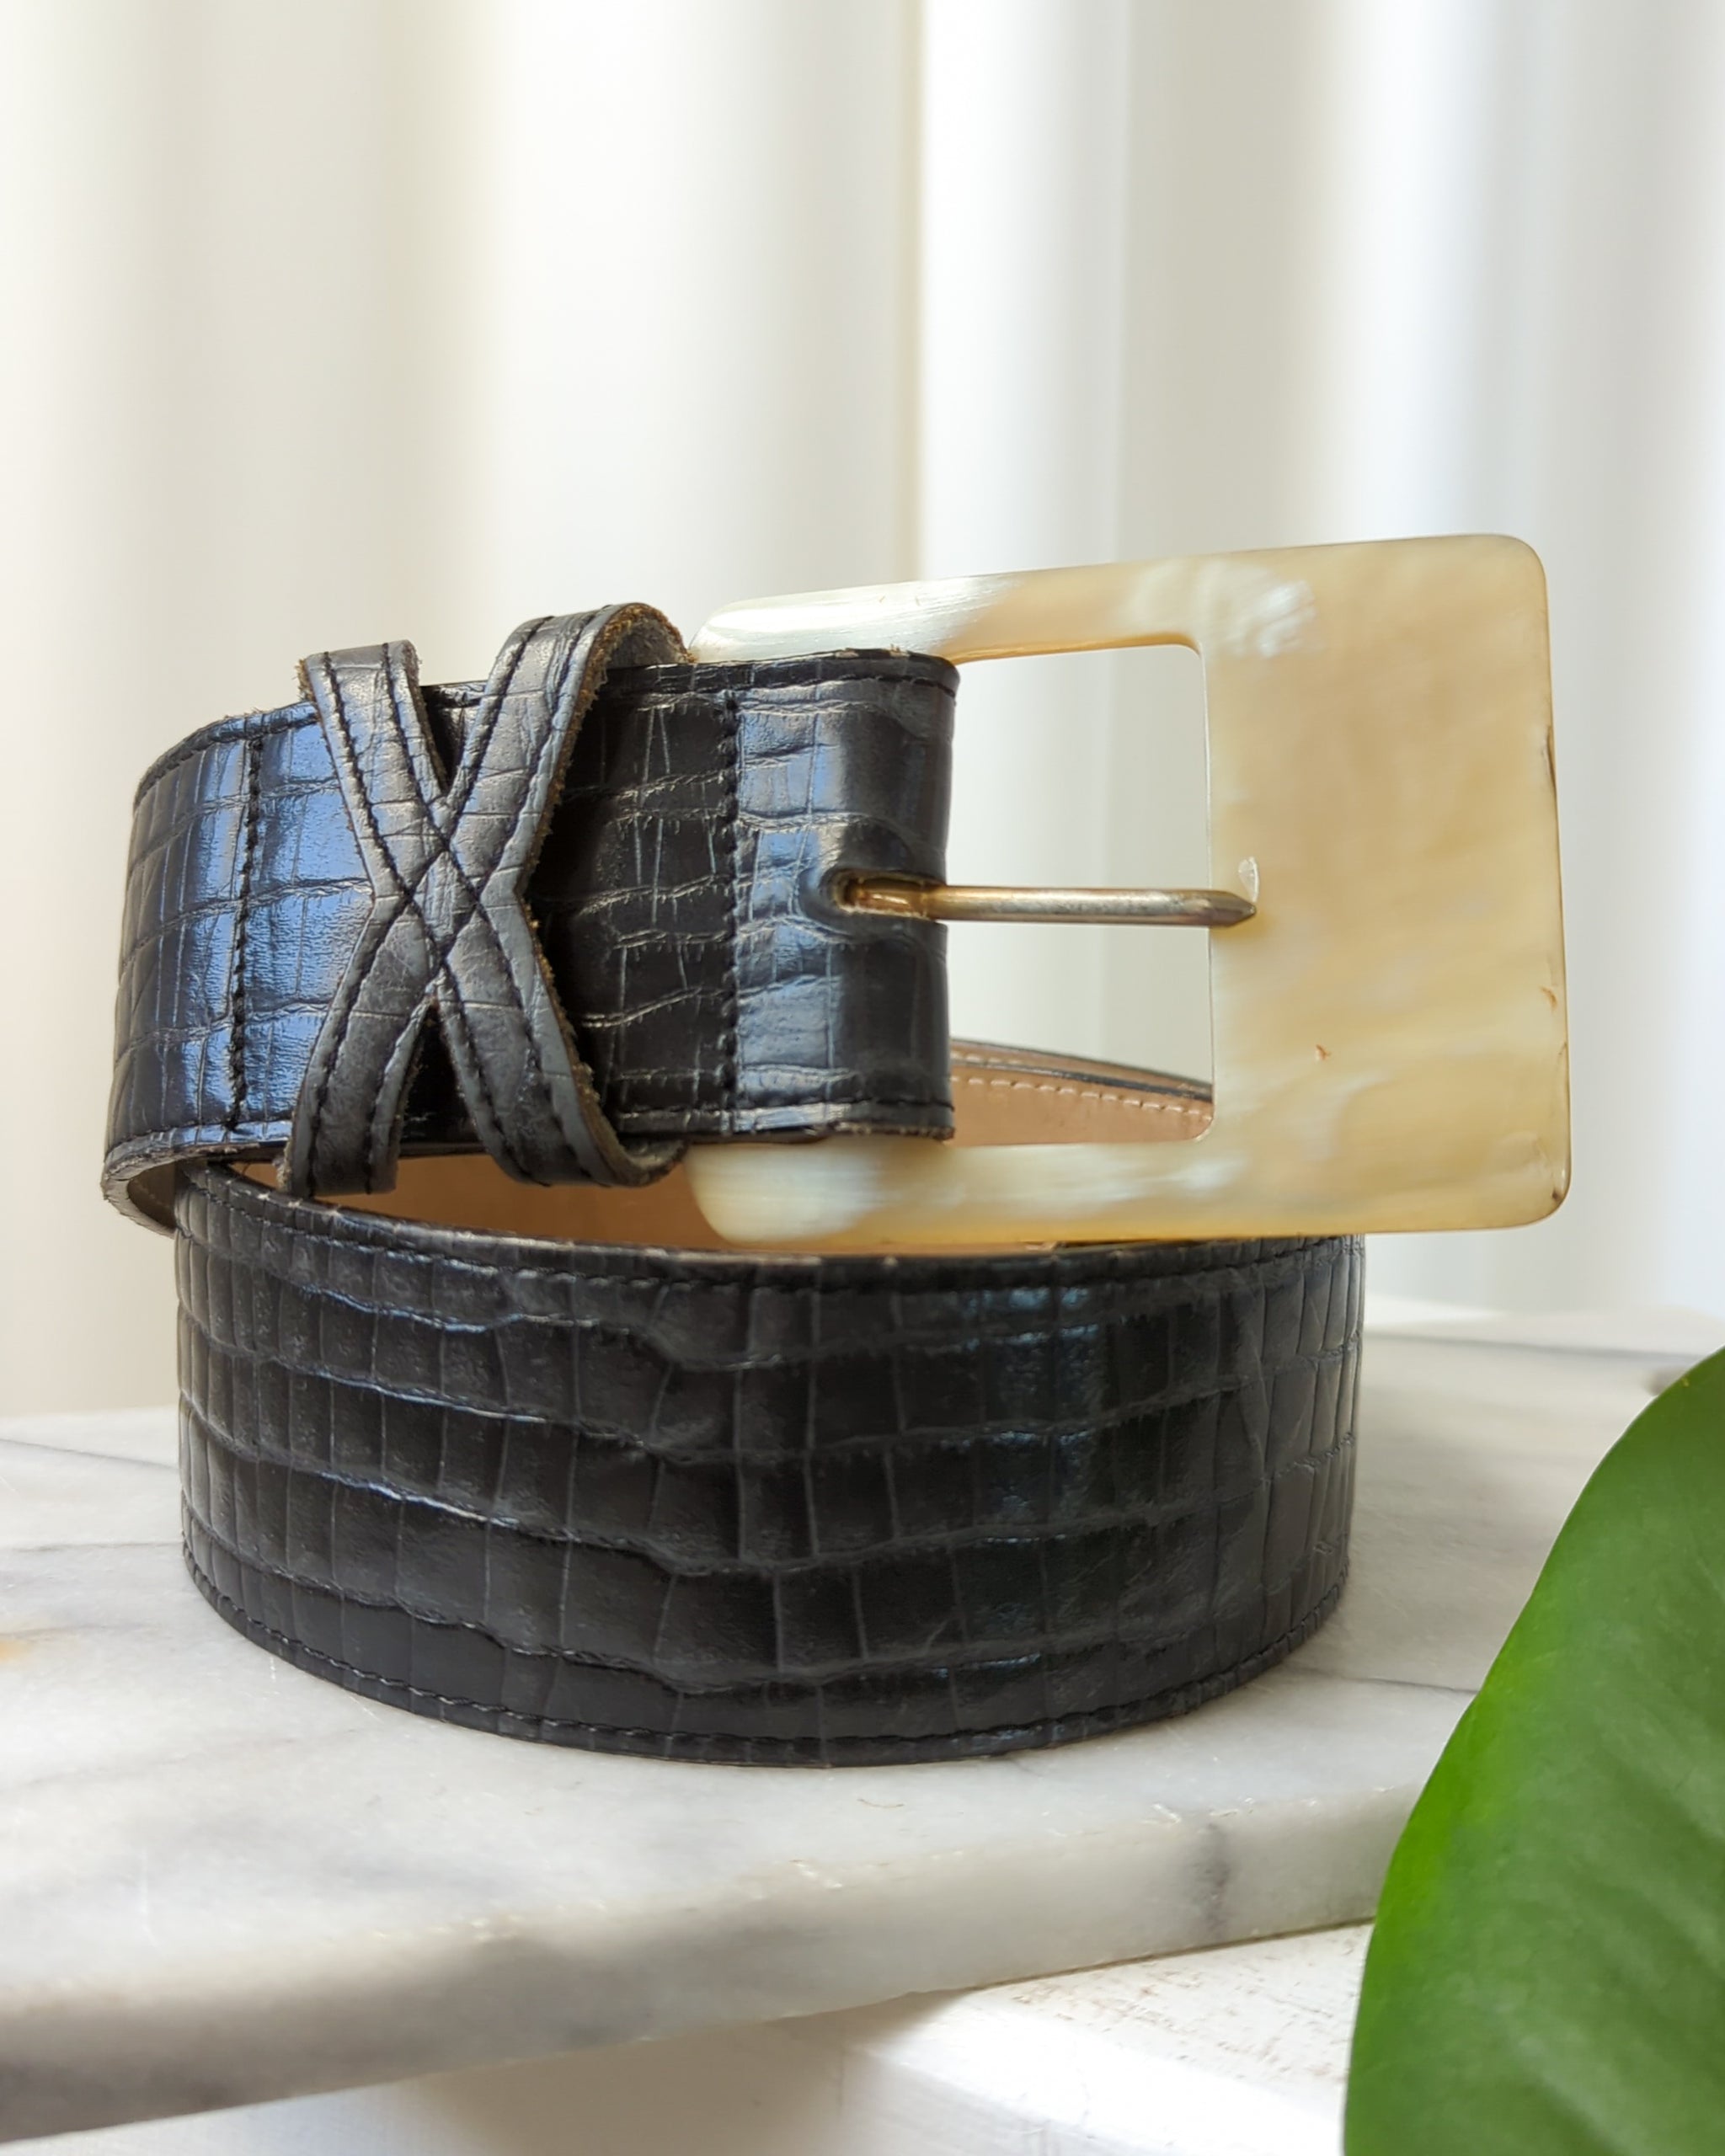 Leather Belts and Accessories Archives - Leather Image